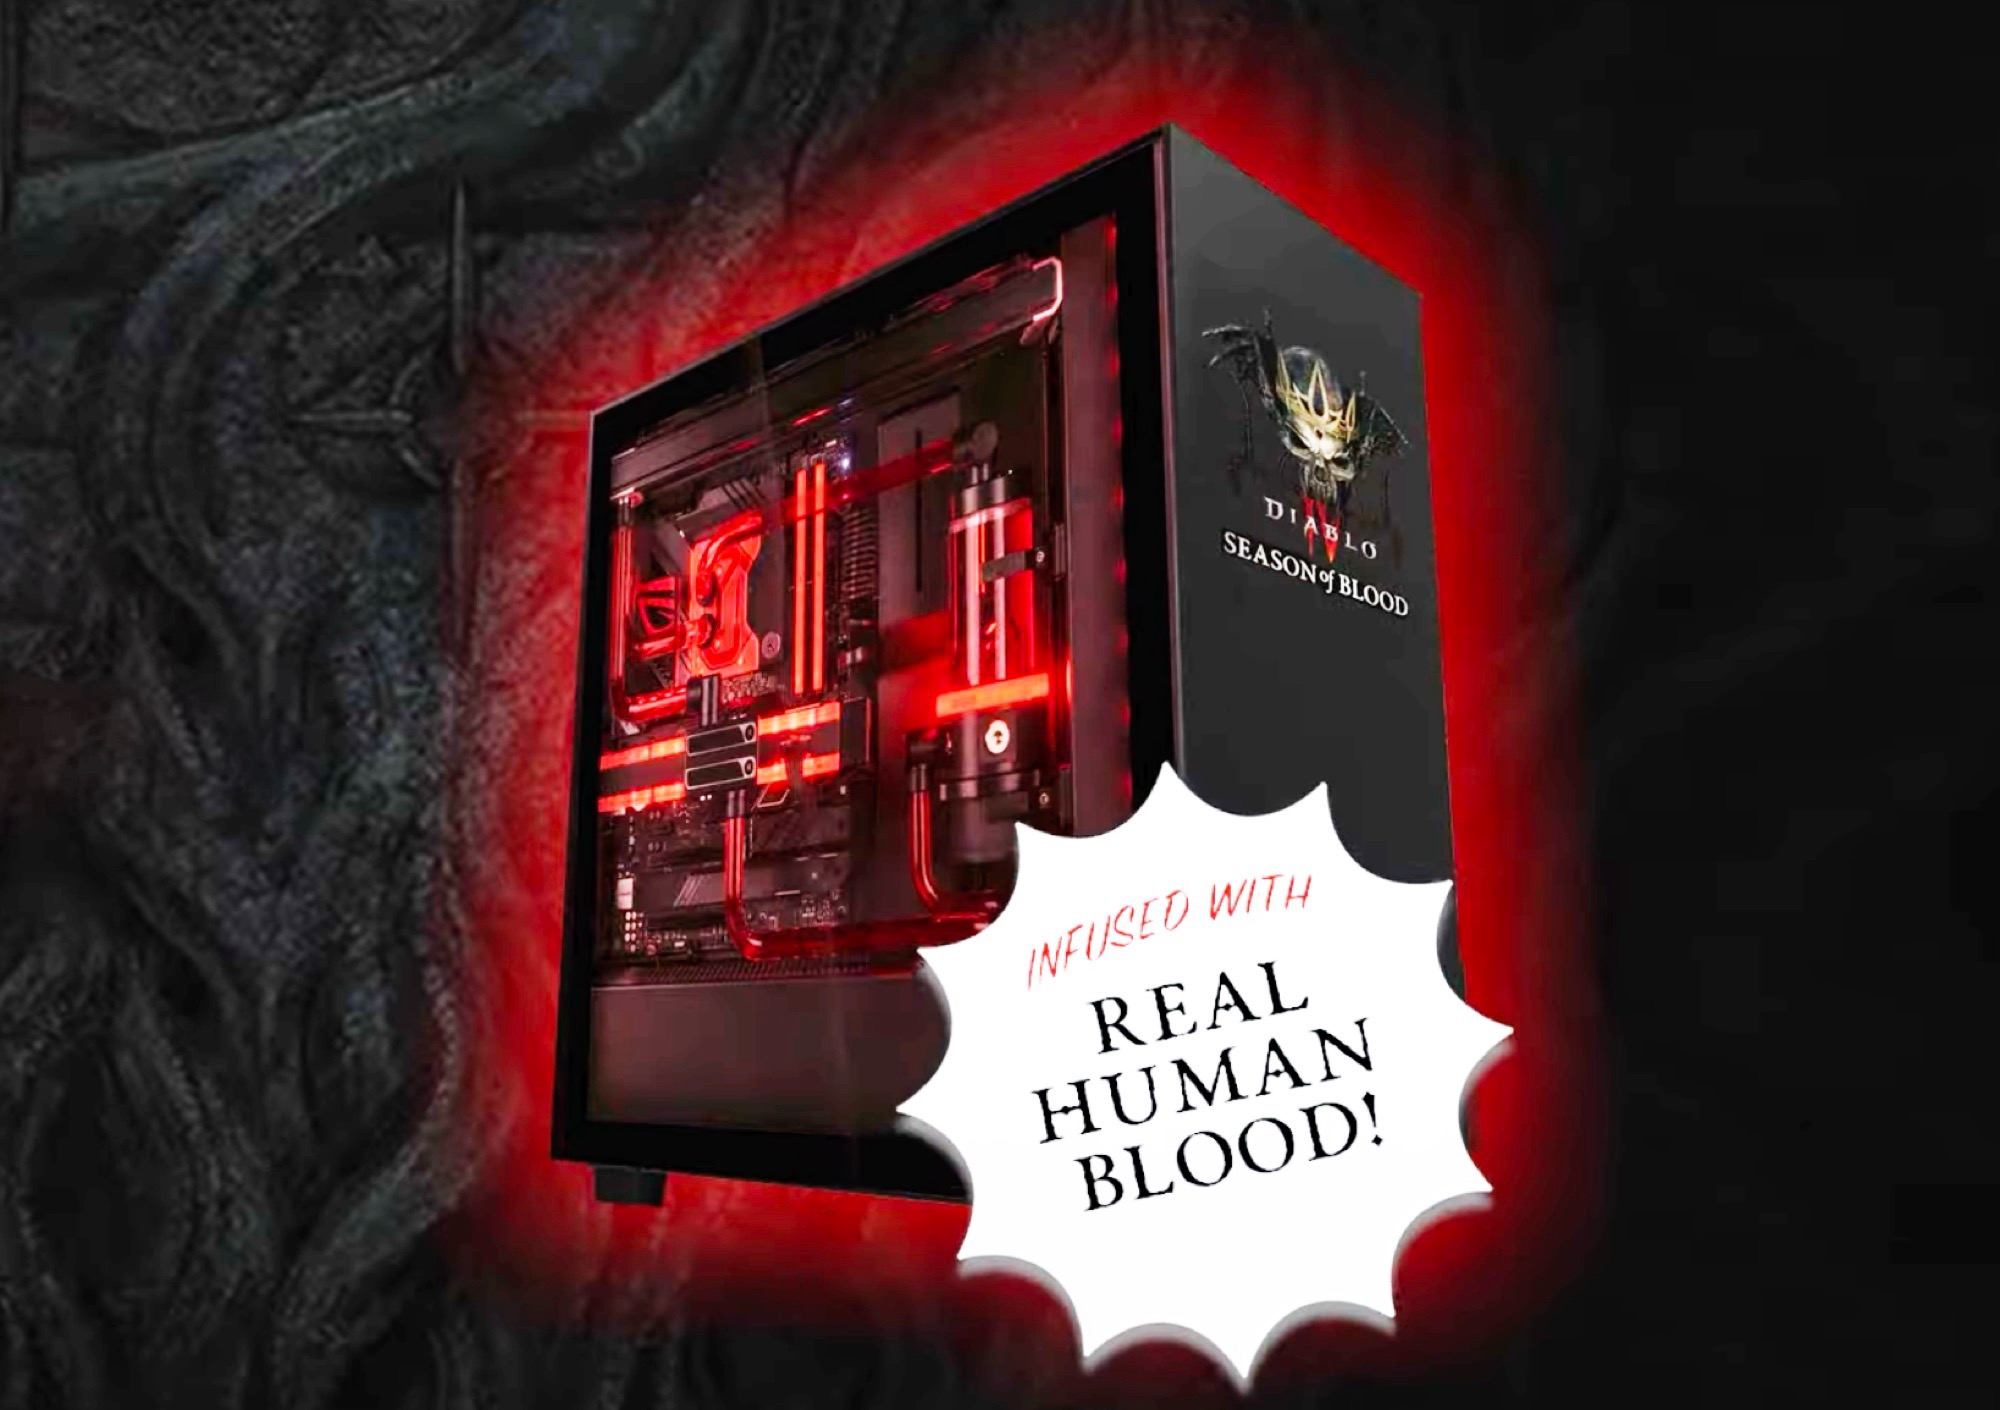 IV NotebookCheck.net giveway donation Blizzard - News announces gaming GeForce Activision Diablo blood RTX NVIDIA 4090 PC campaign for